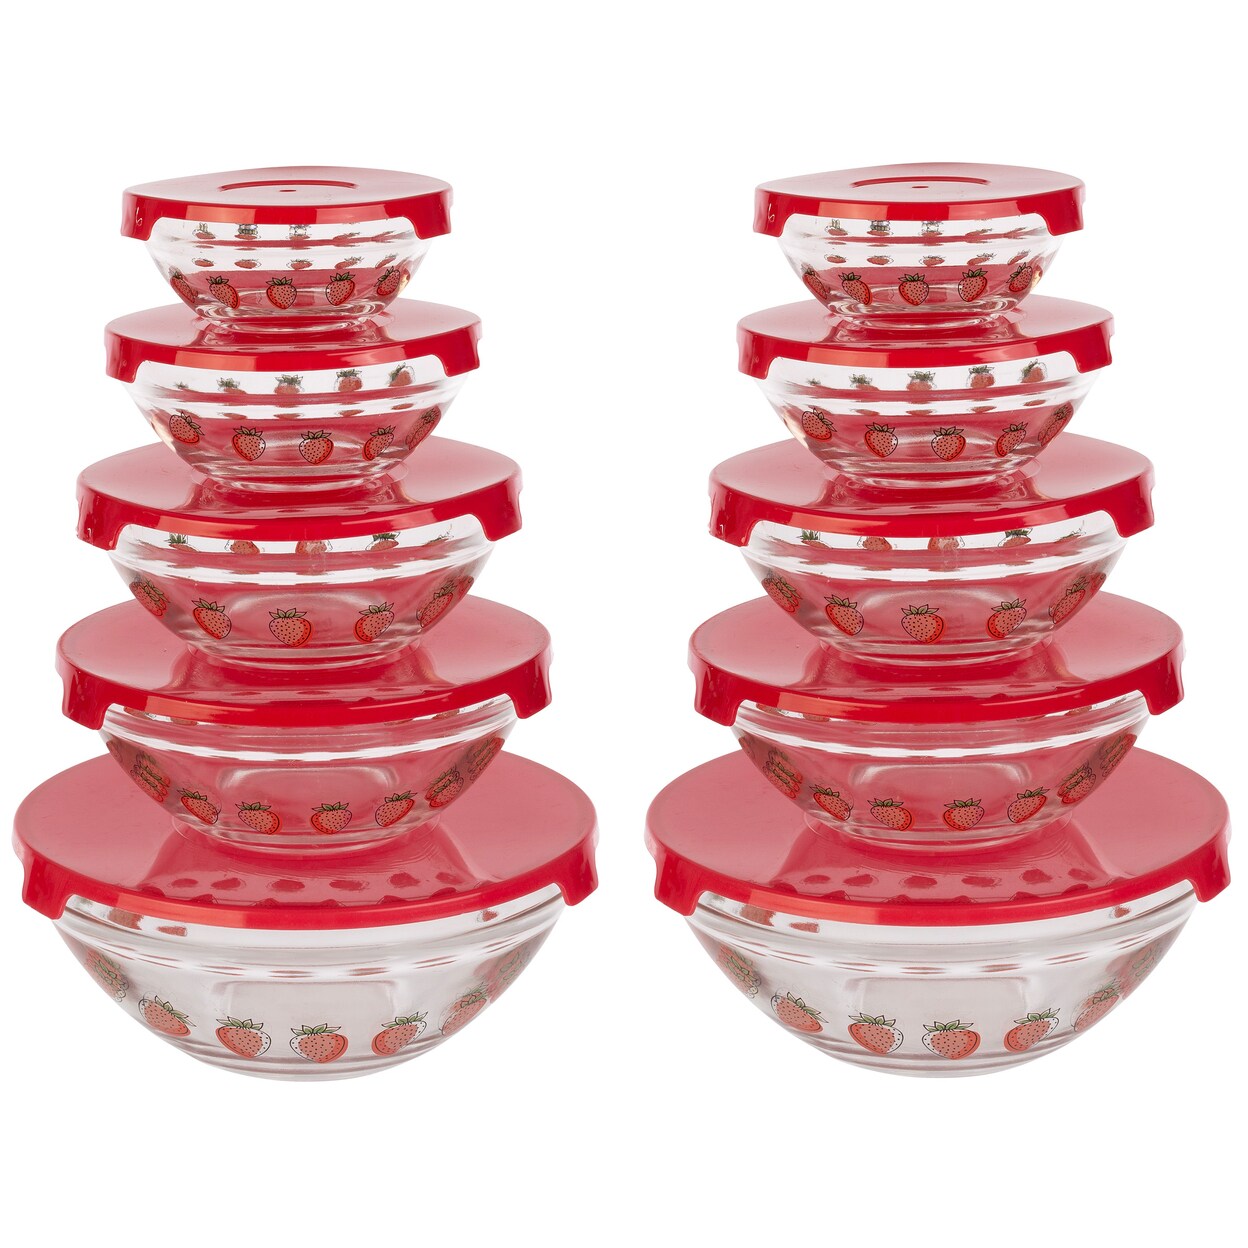 Chef Buddy 20PC Glass Bowls with Lids Set Strawberry Design Mixing Bowls Multiple Sizes